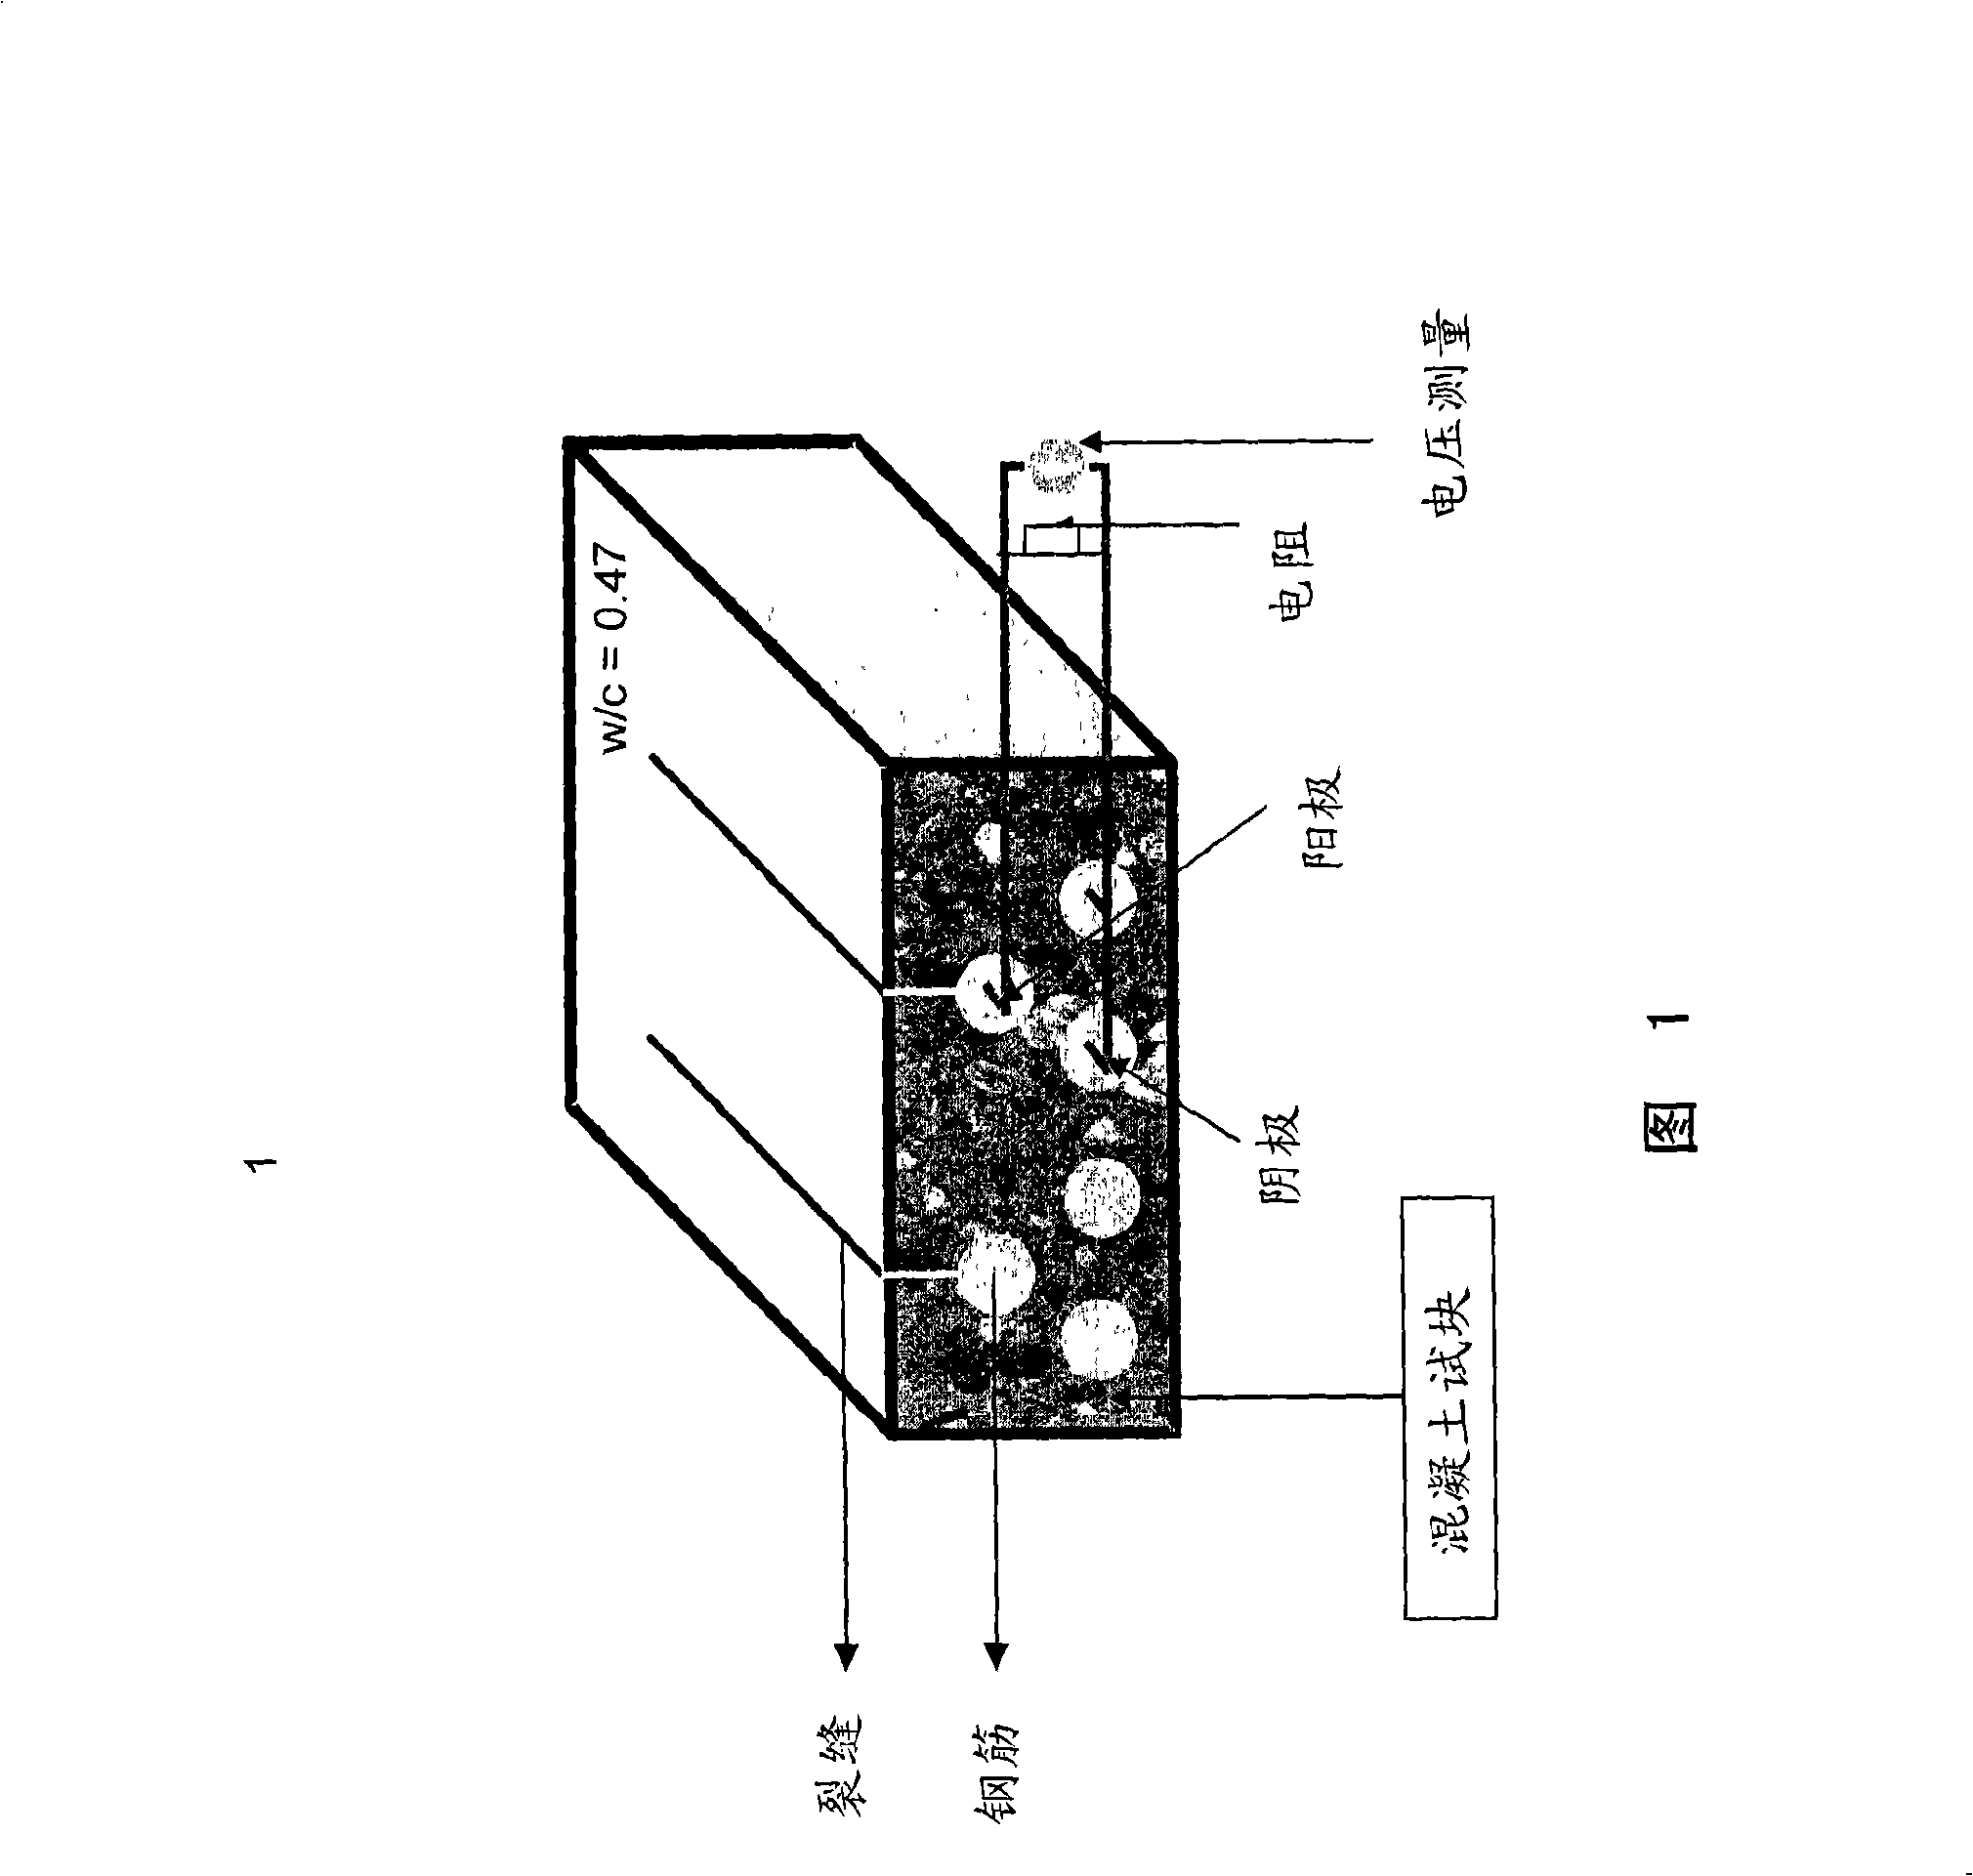 Corrosion inhibitor of steel reinforced concrete